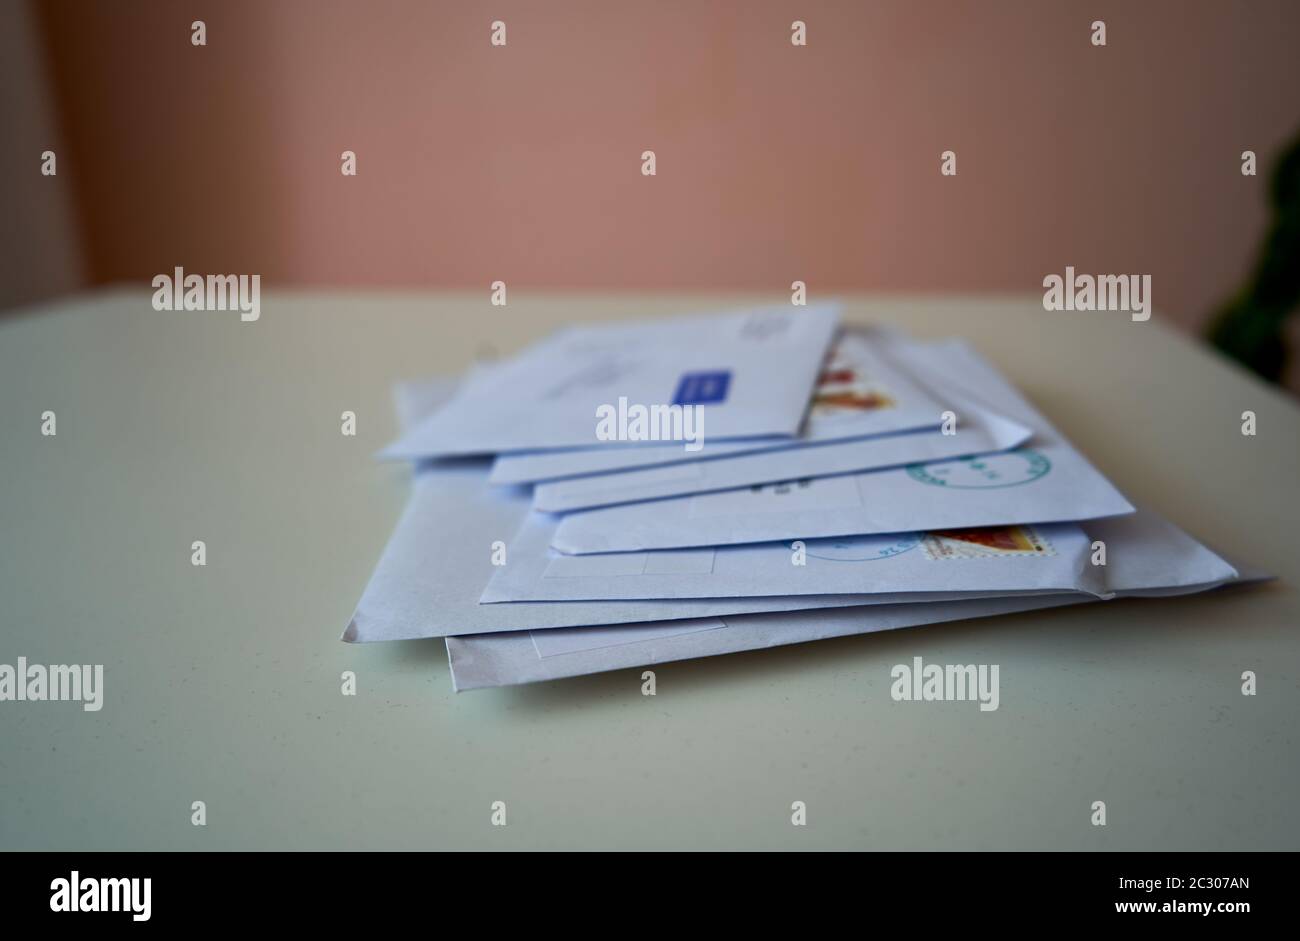 Pile of envelopes on the table Stock Photo